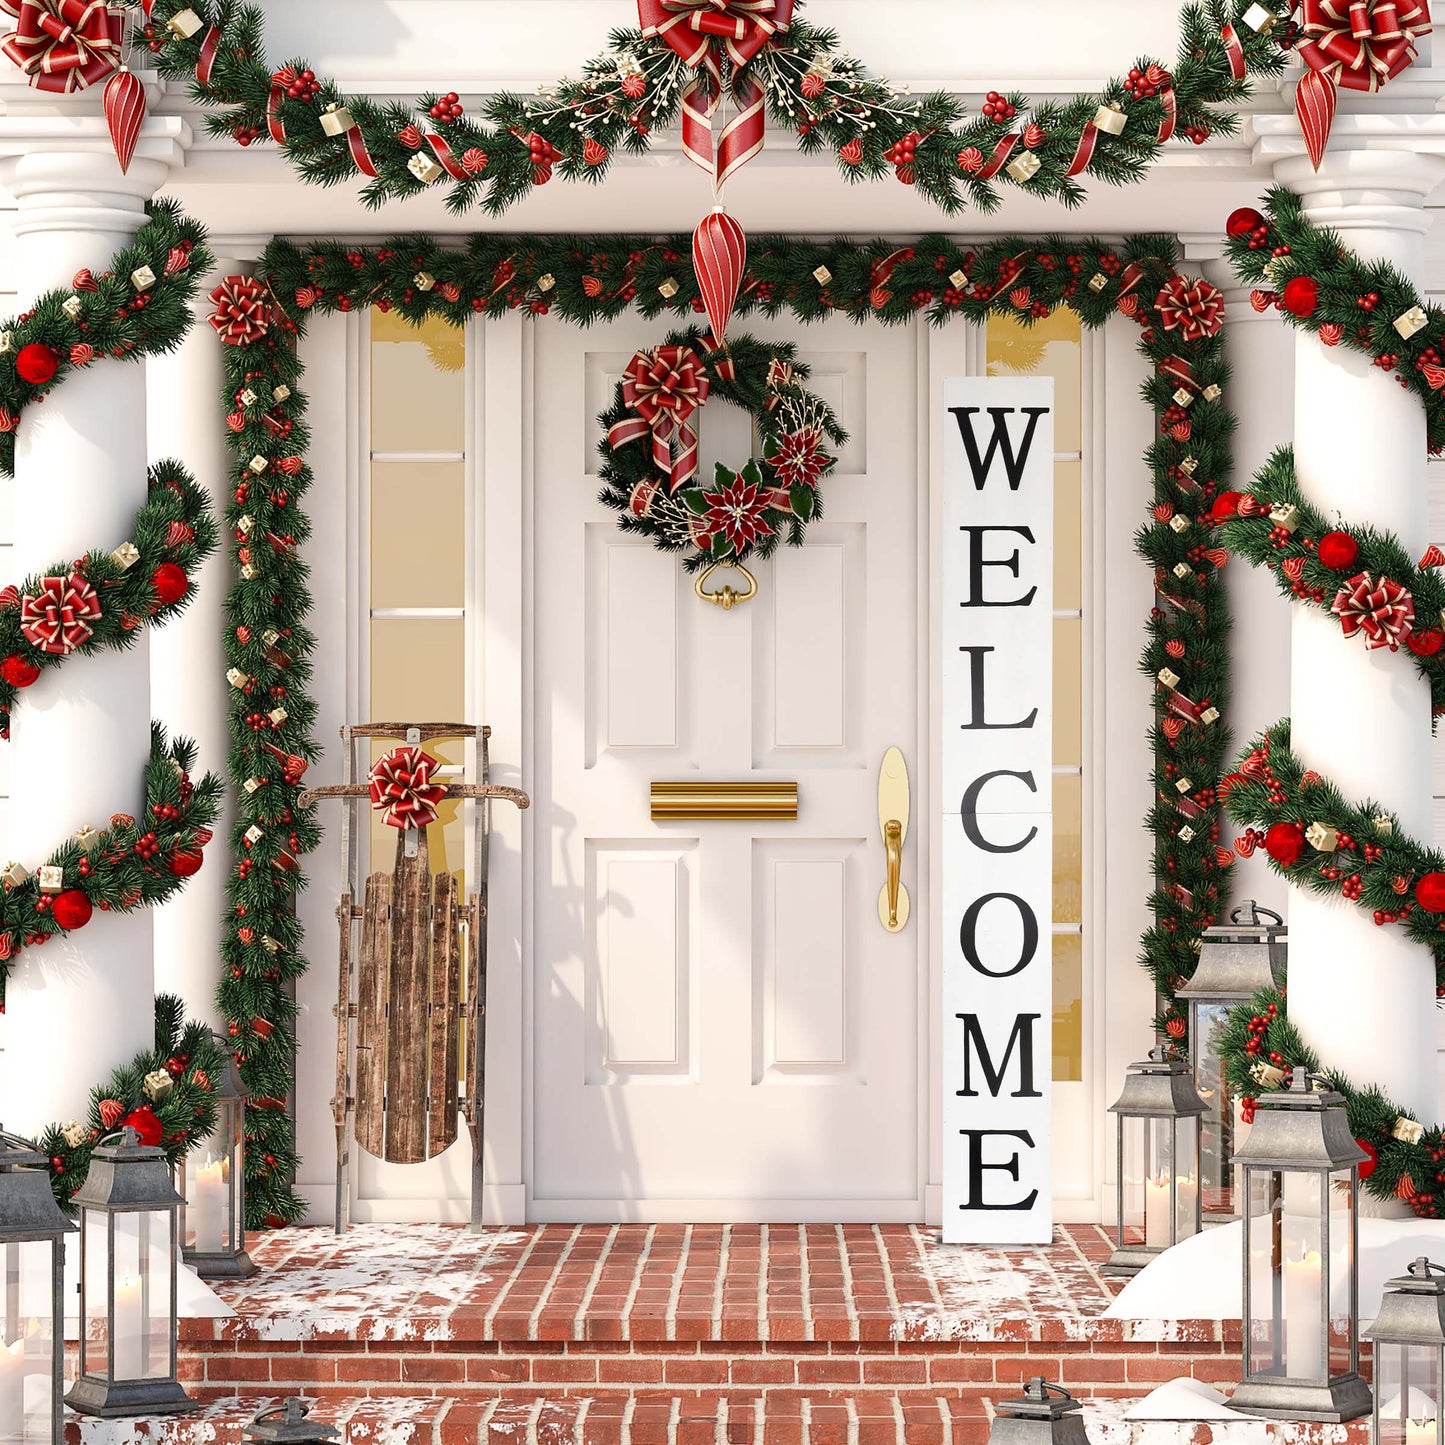 72in Rustic White Outdoor Welcome Sign - Elegant Decor for Front Door, Porch, and Entryway